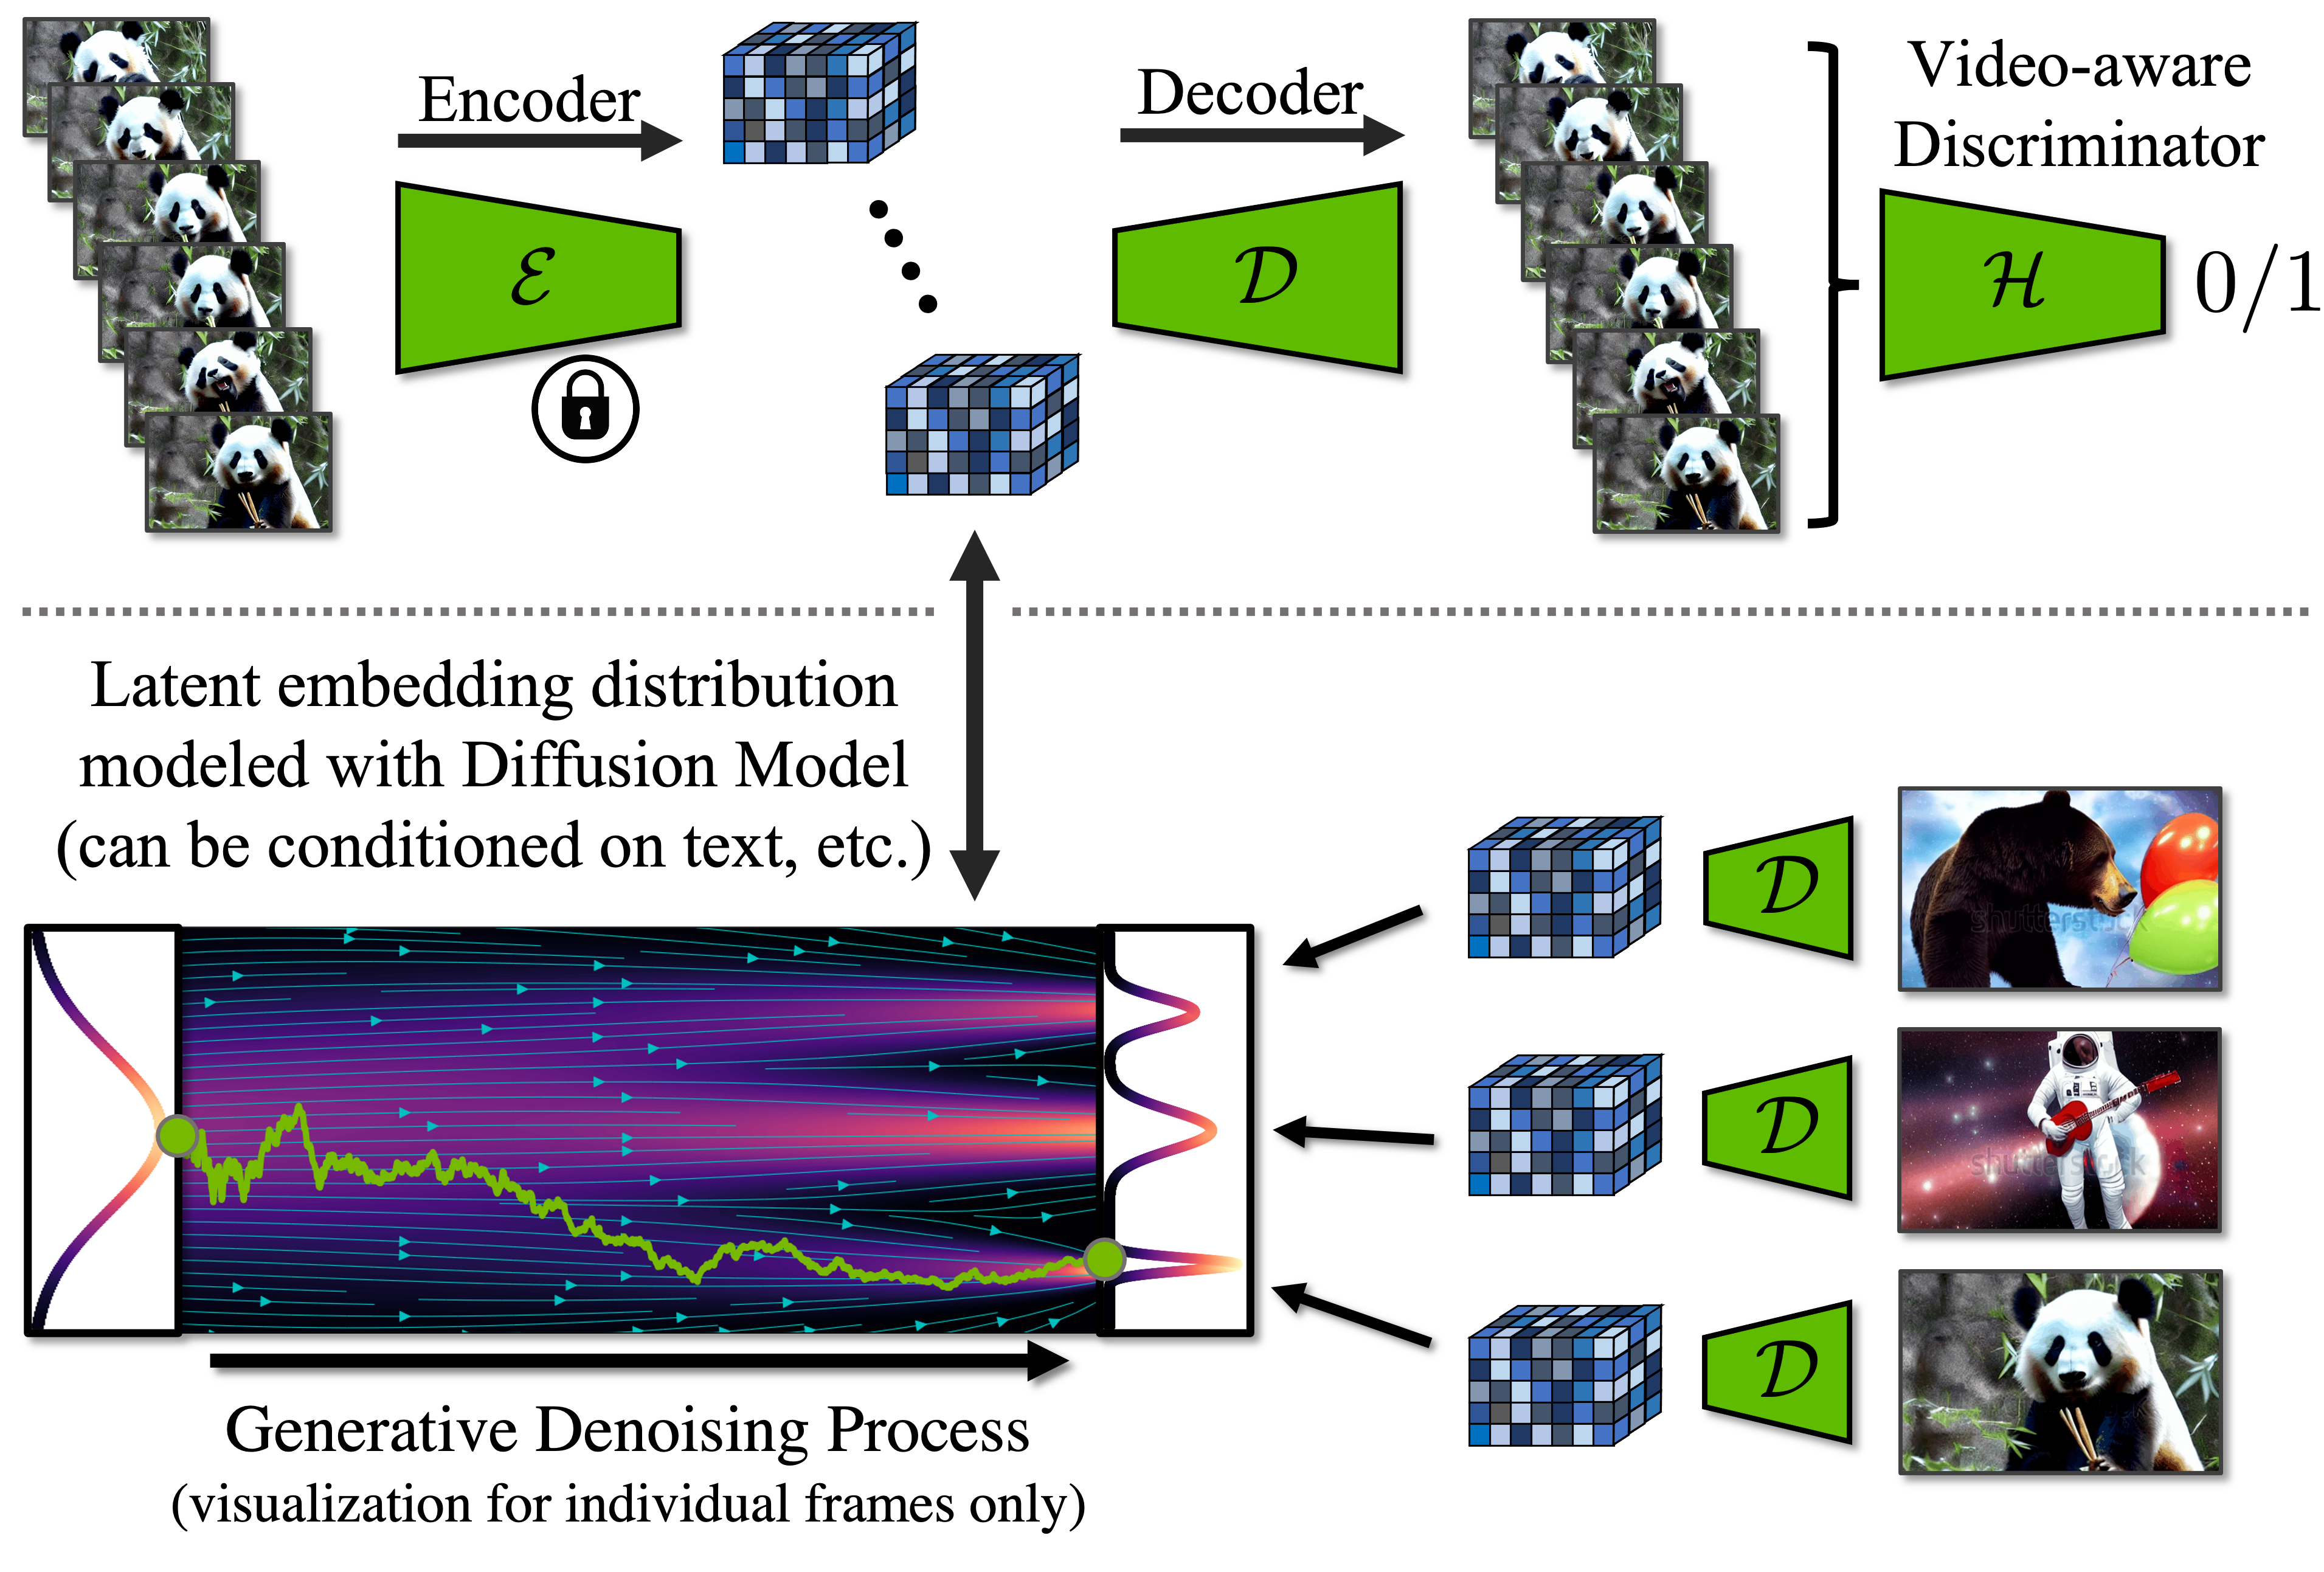 High-Resolution Video Synthesis with Latent Diffusion Models